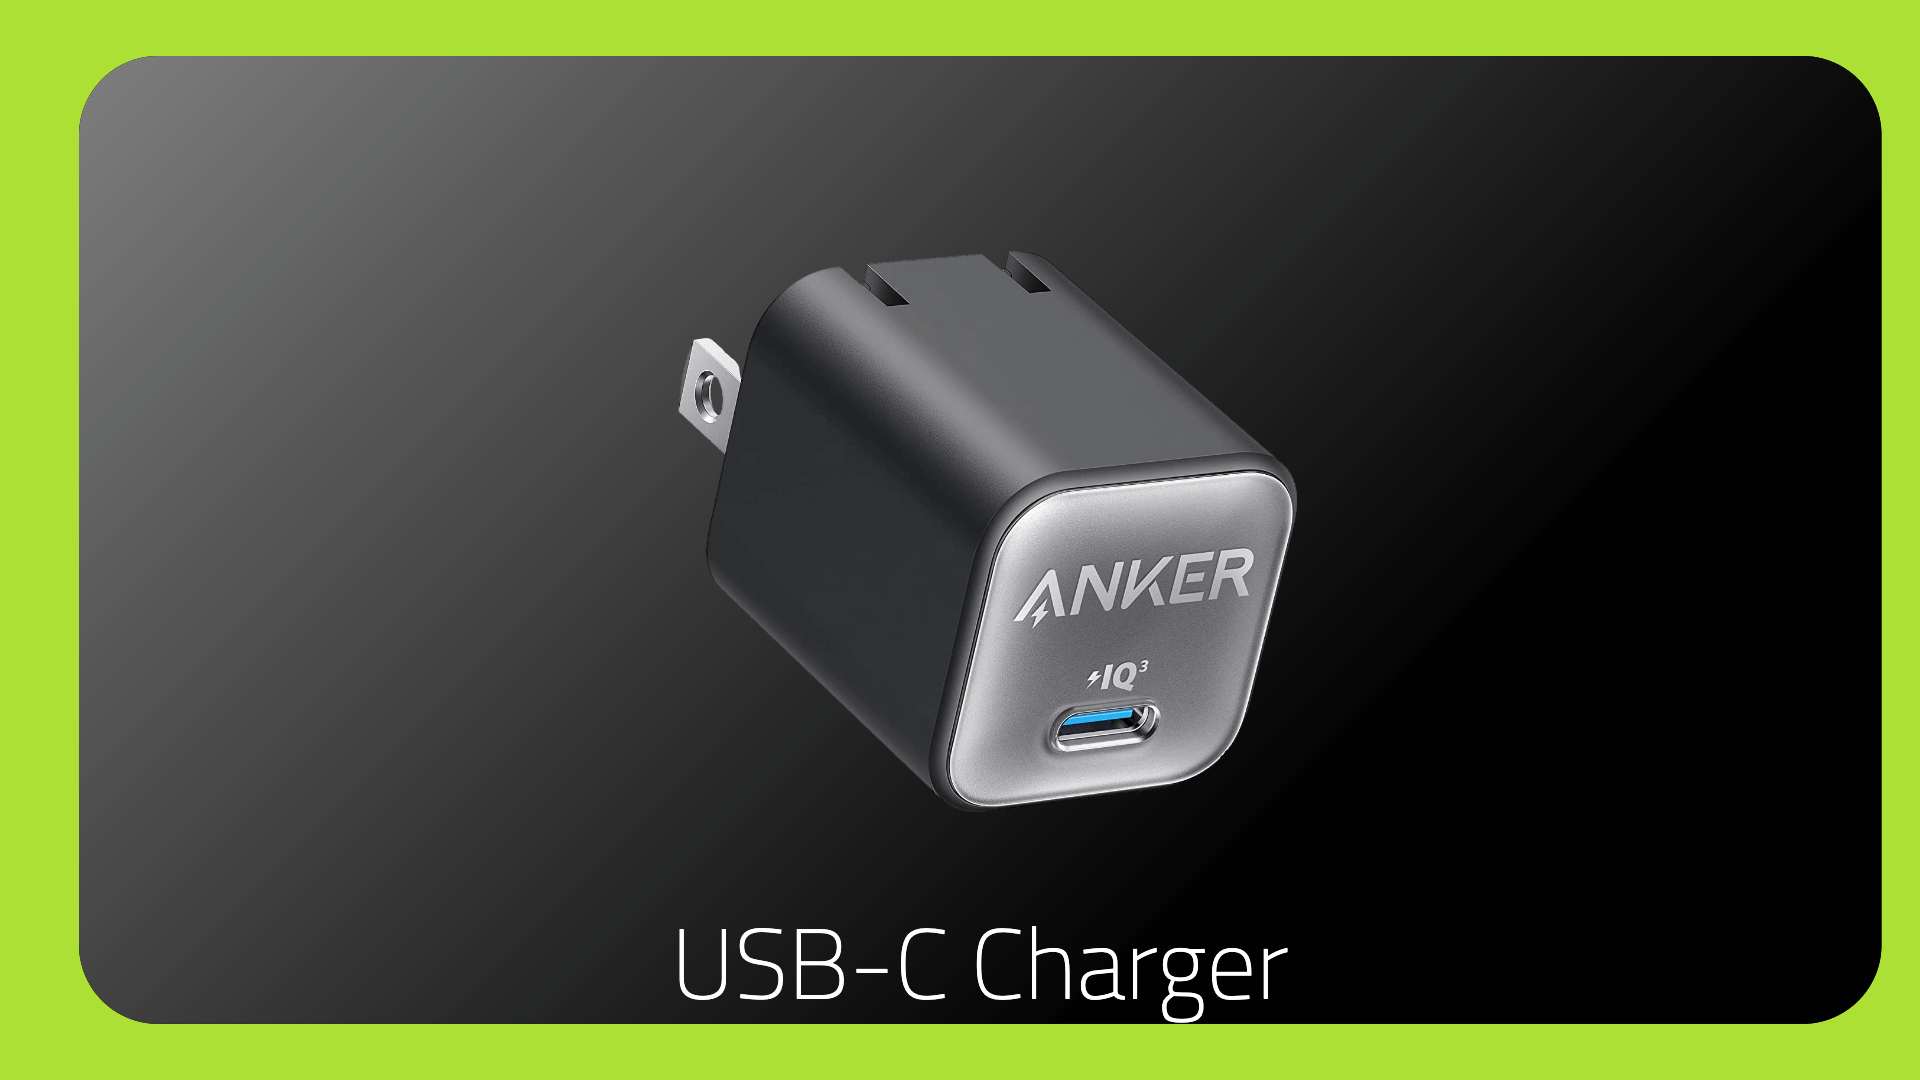 USB C GaN Charger 30W, Anker 511 Charger (Nano 3) + Anker 543 USB C to